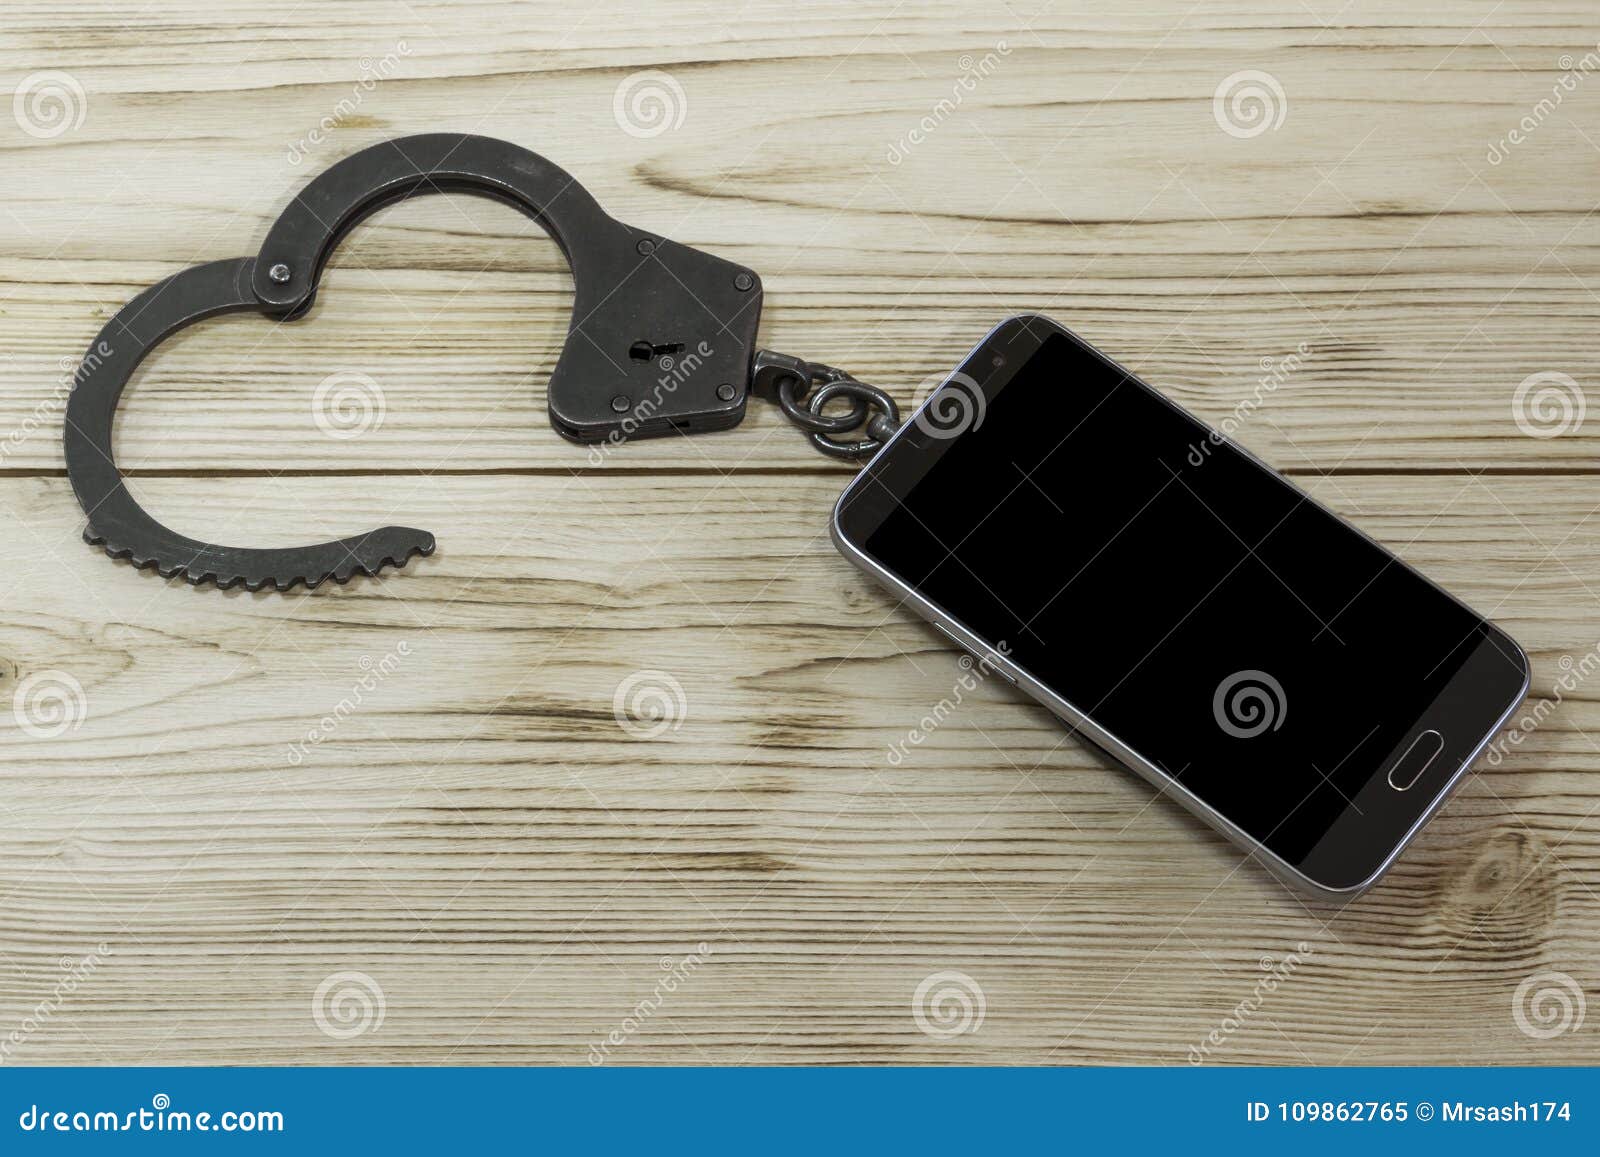 Download Handcuffs And Telephone On The Background Of A Wooden ...